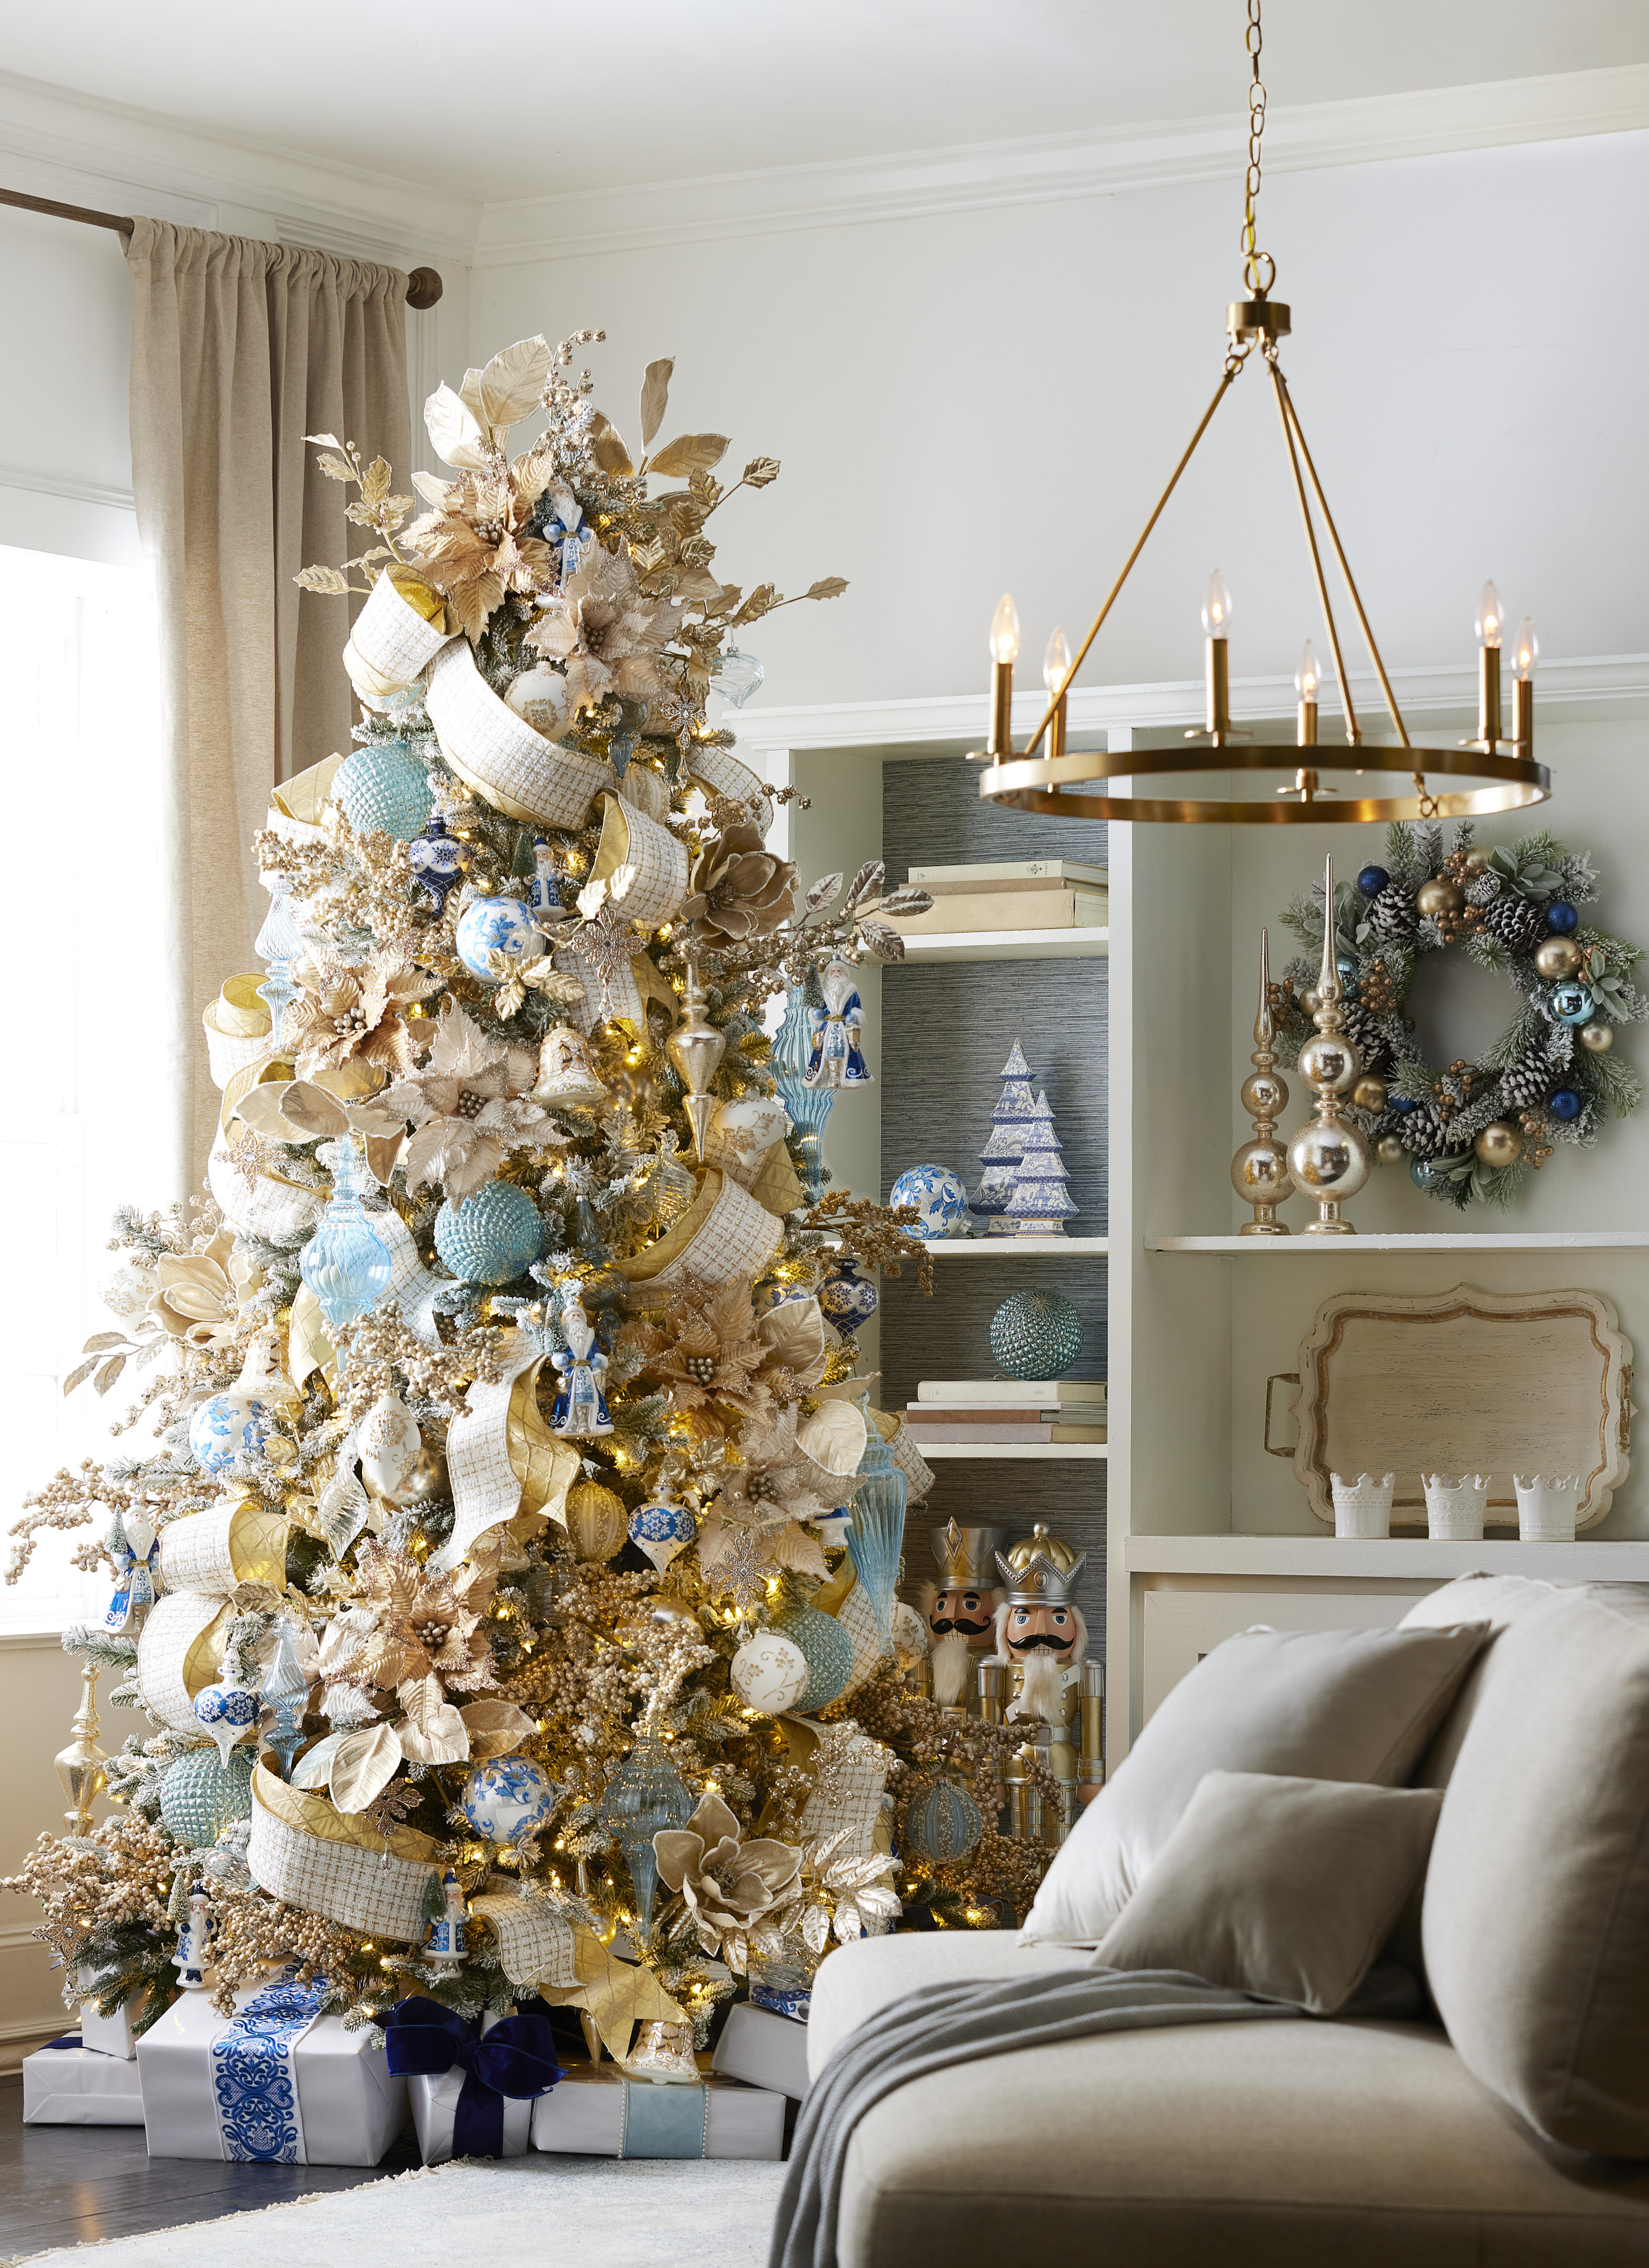 This Home Is Filled with Vintage-Inspired Christmas Decorating Ideas